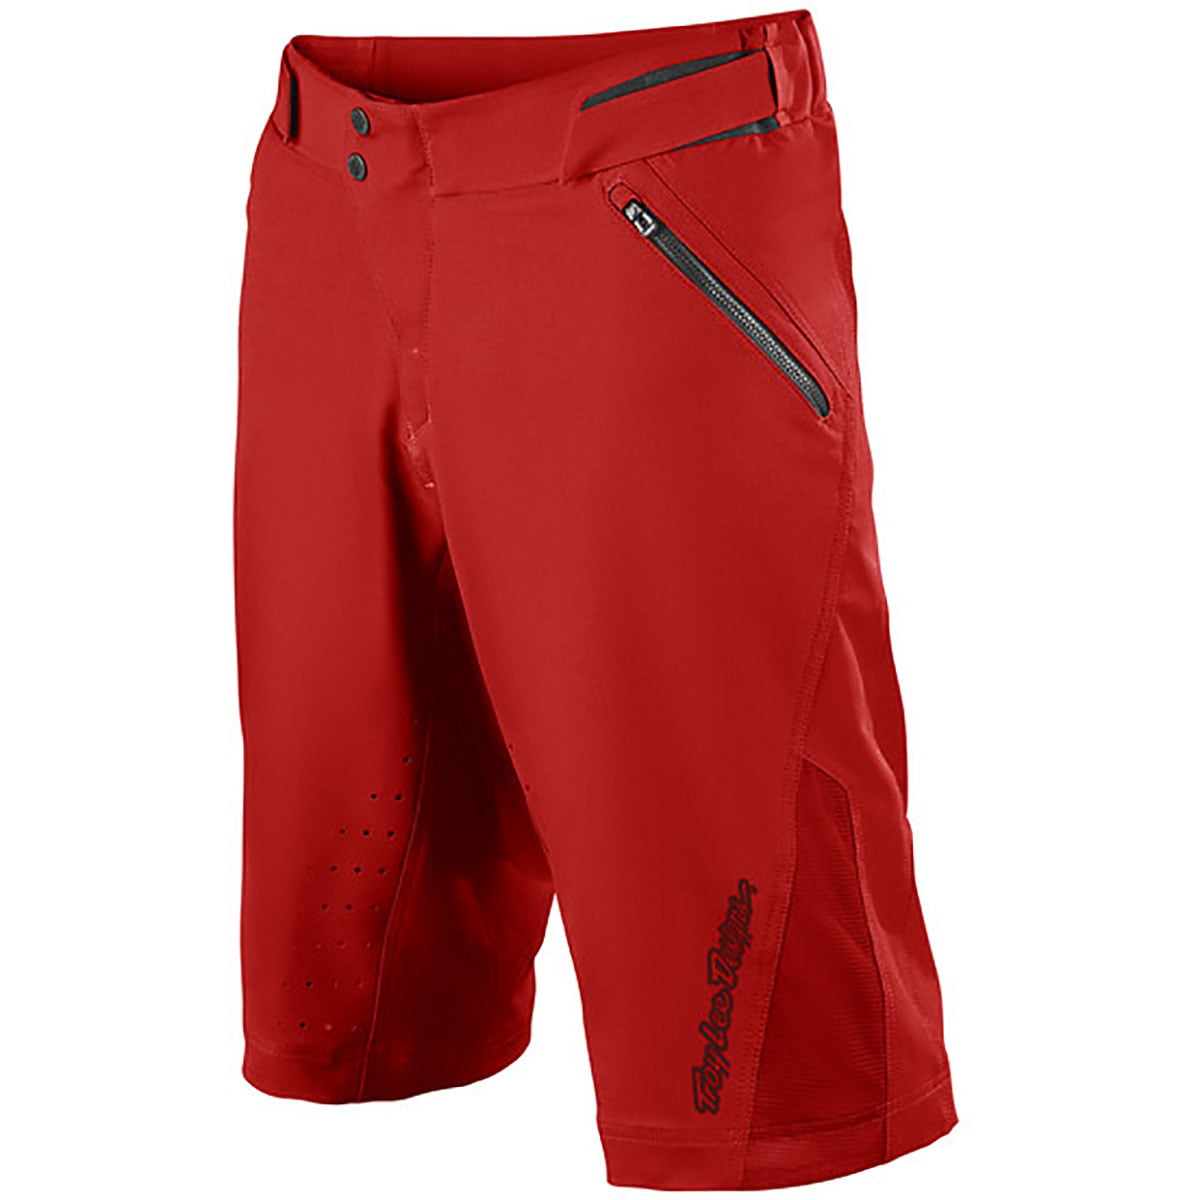 Troy Lee Designs Ruckus w/Liner Mens Off-Road BMX Cycling Shorts